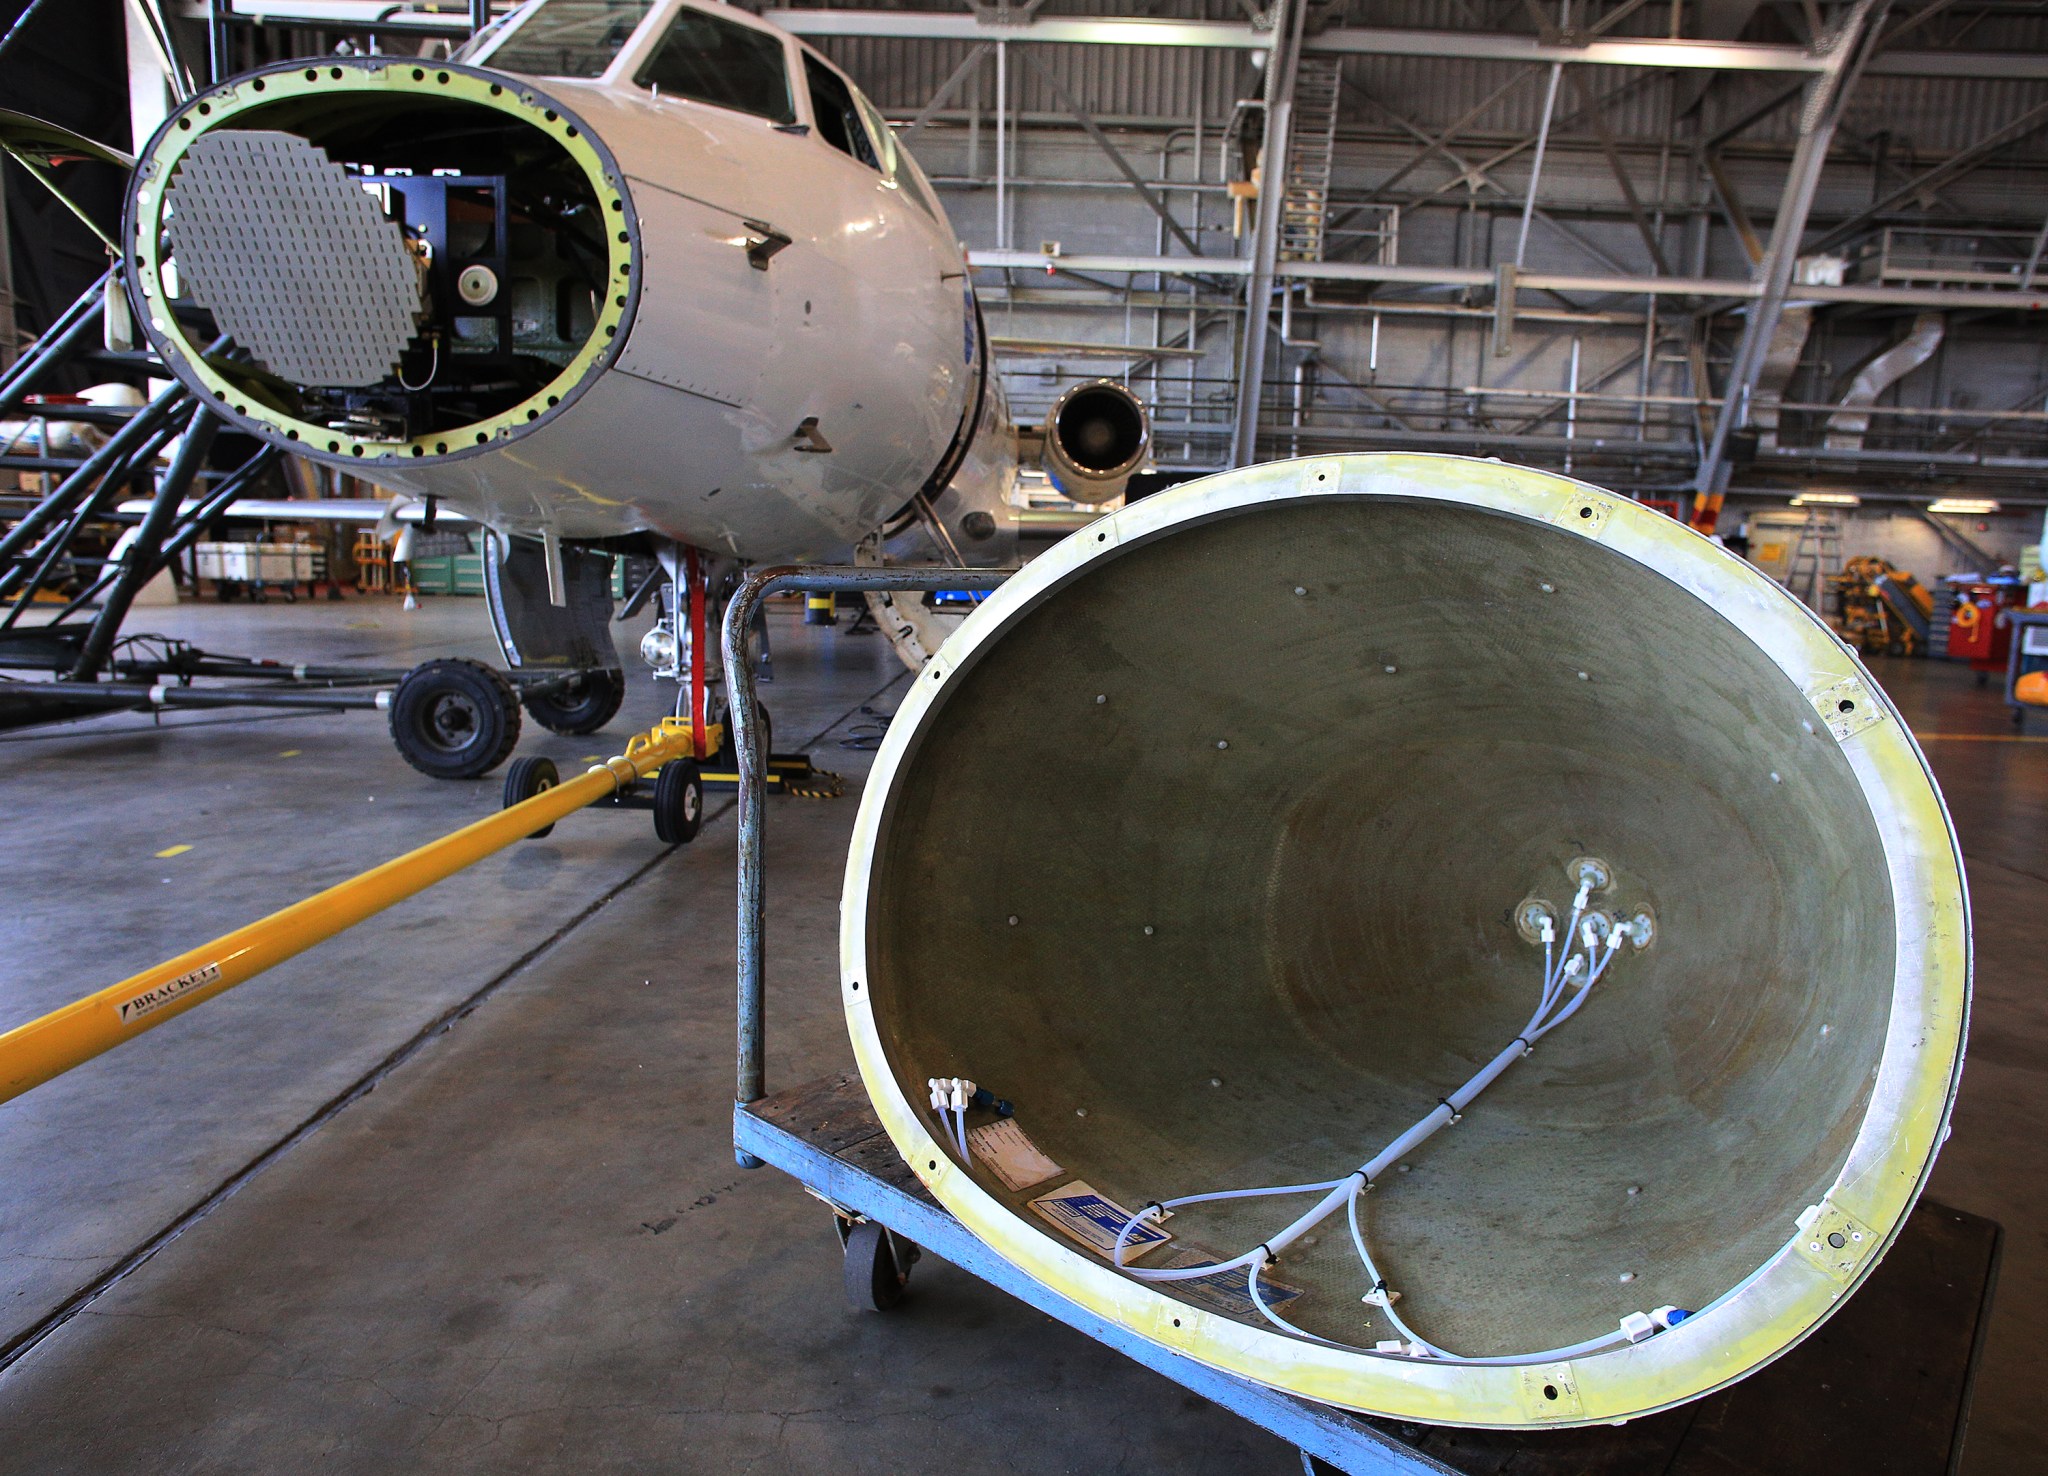 Equipment in the nose of the Guardian will precisely measure wind velocity when the jet flies through the wing tip wake vortices of a DC-8 during ACCESS-II flight tests.